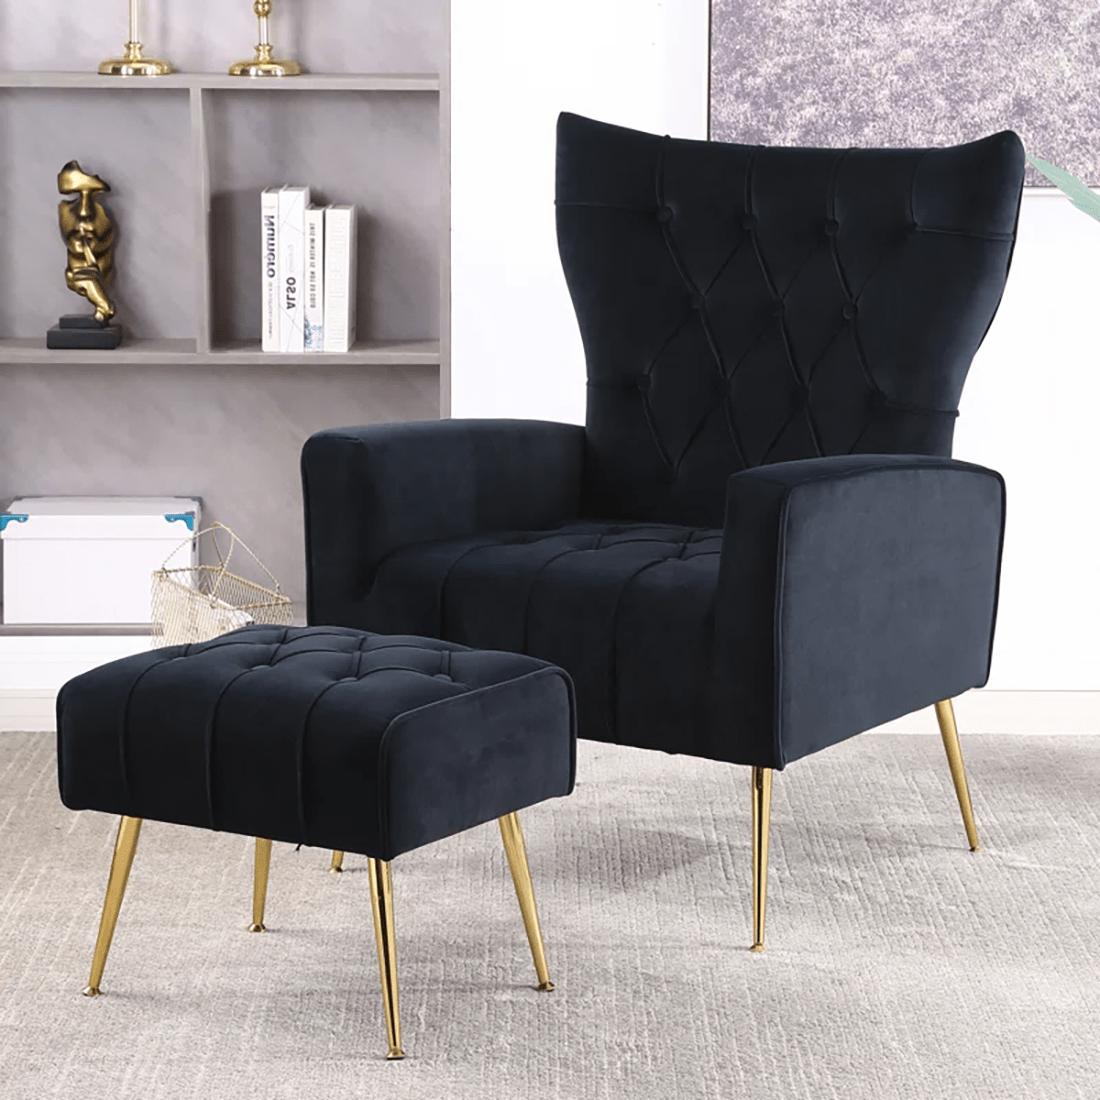 DANNEY ACCENT CHAIR WITH OTTOMAN